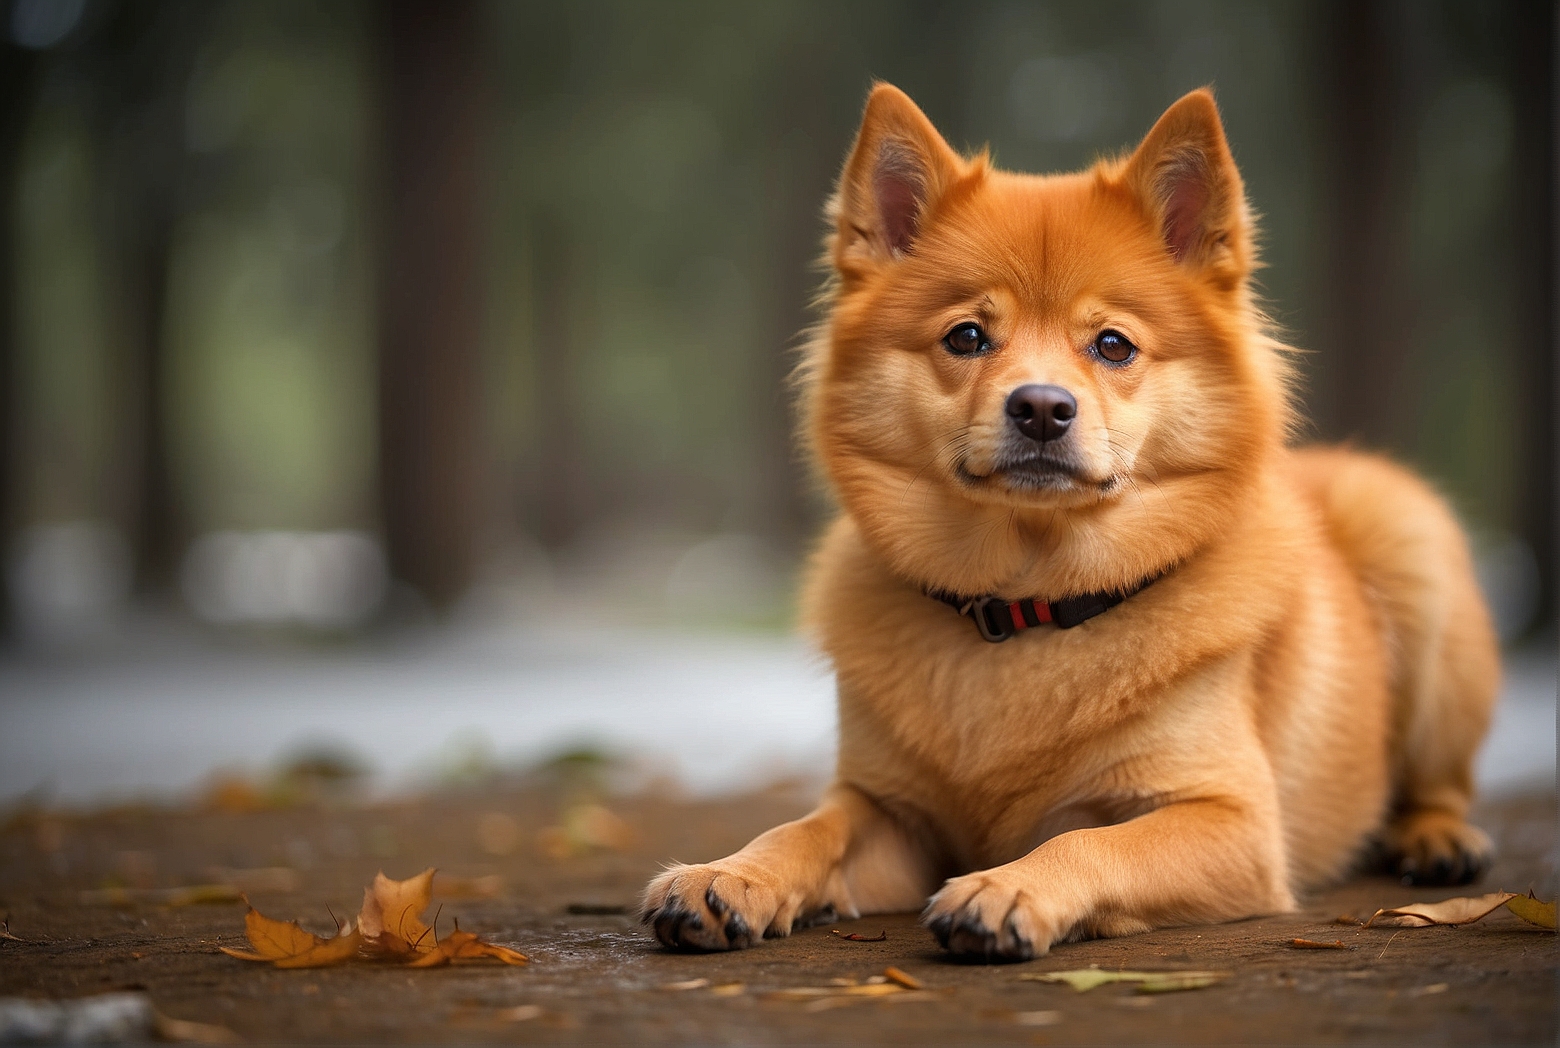 How Much Is A Trained Finnish Spitz